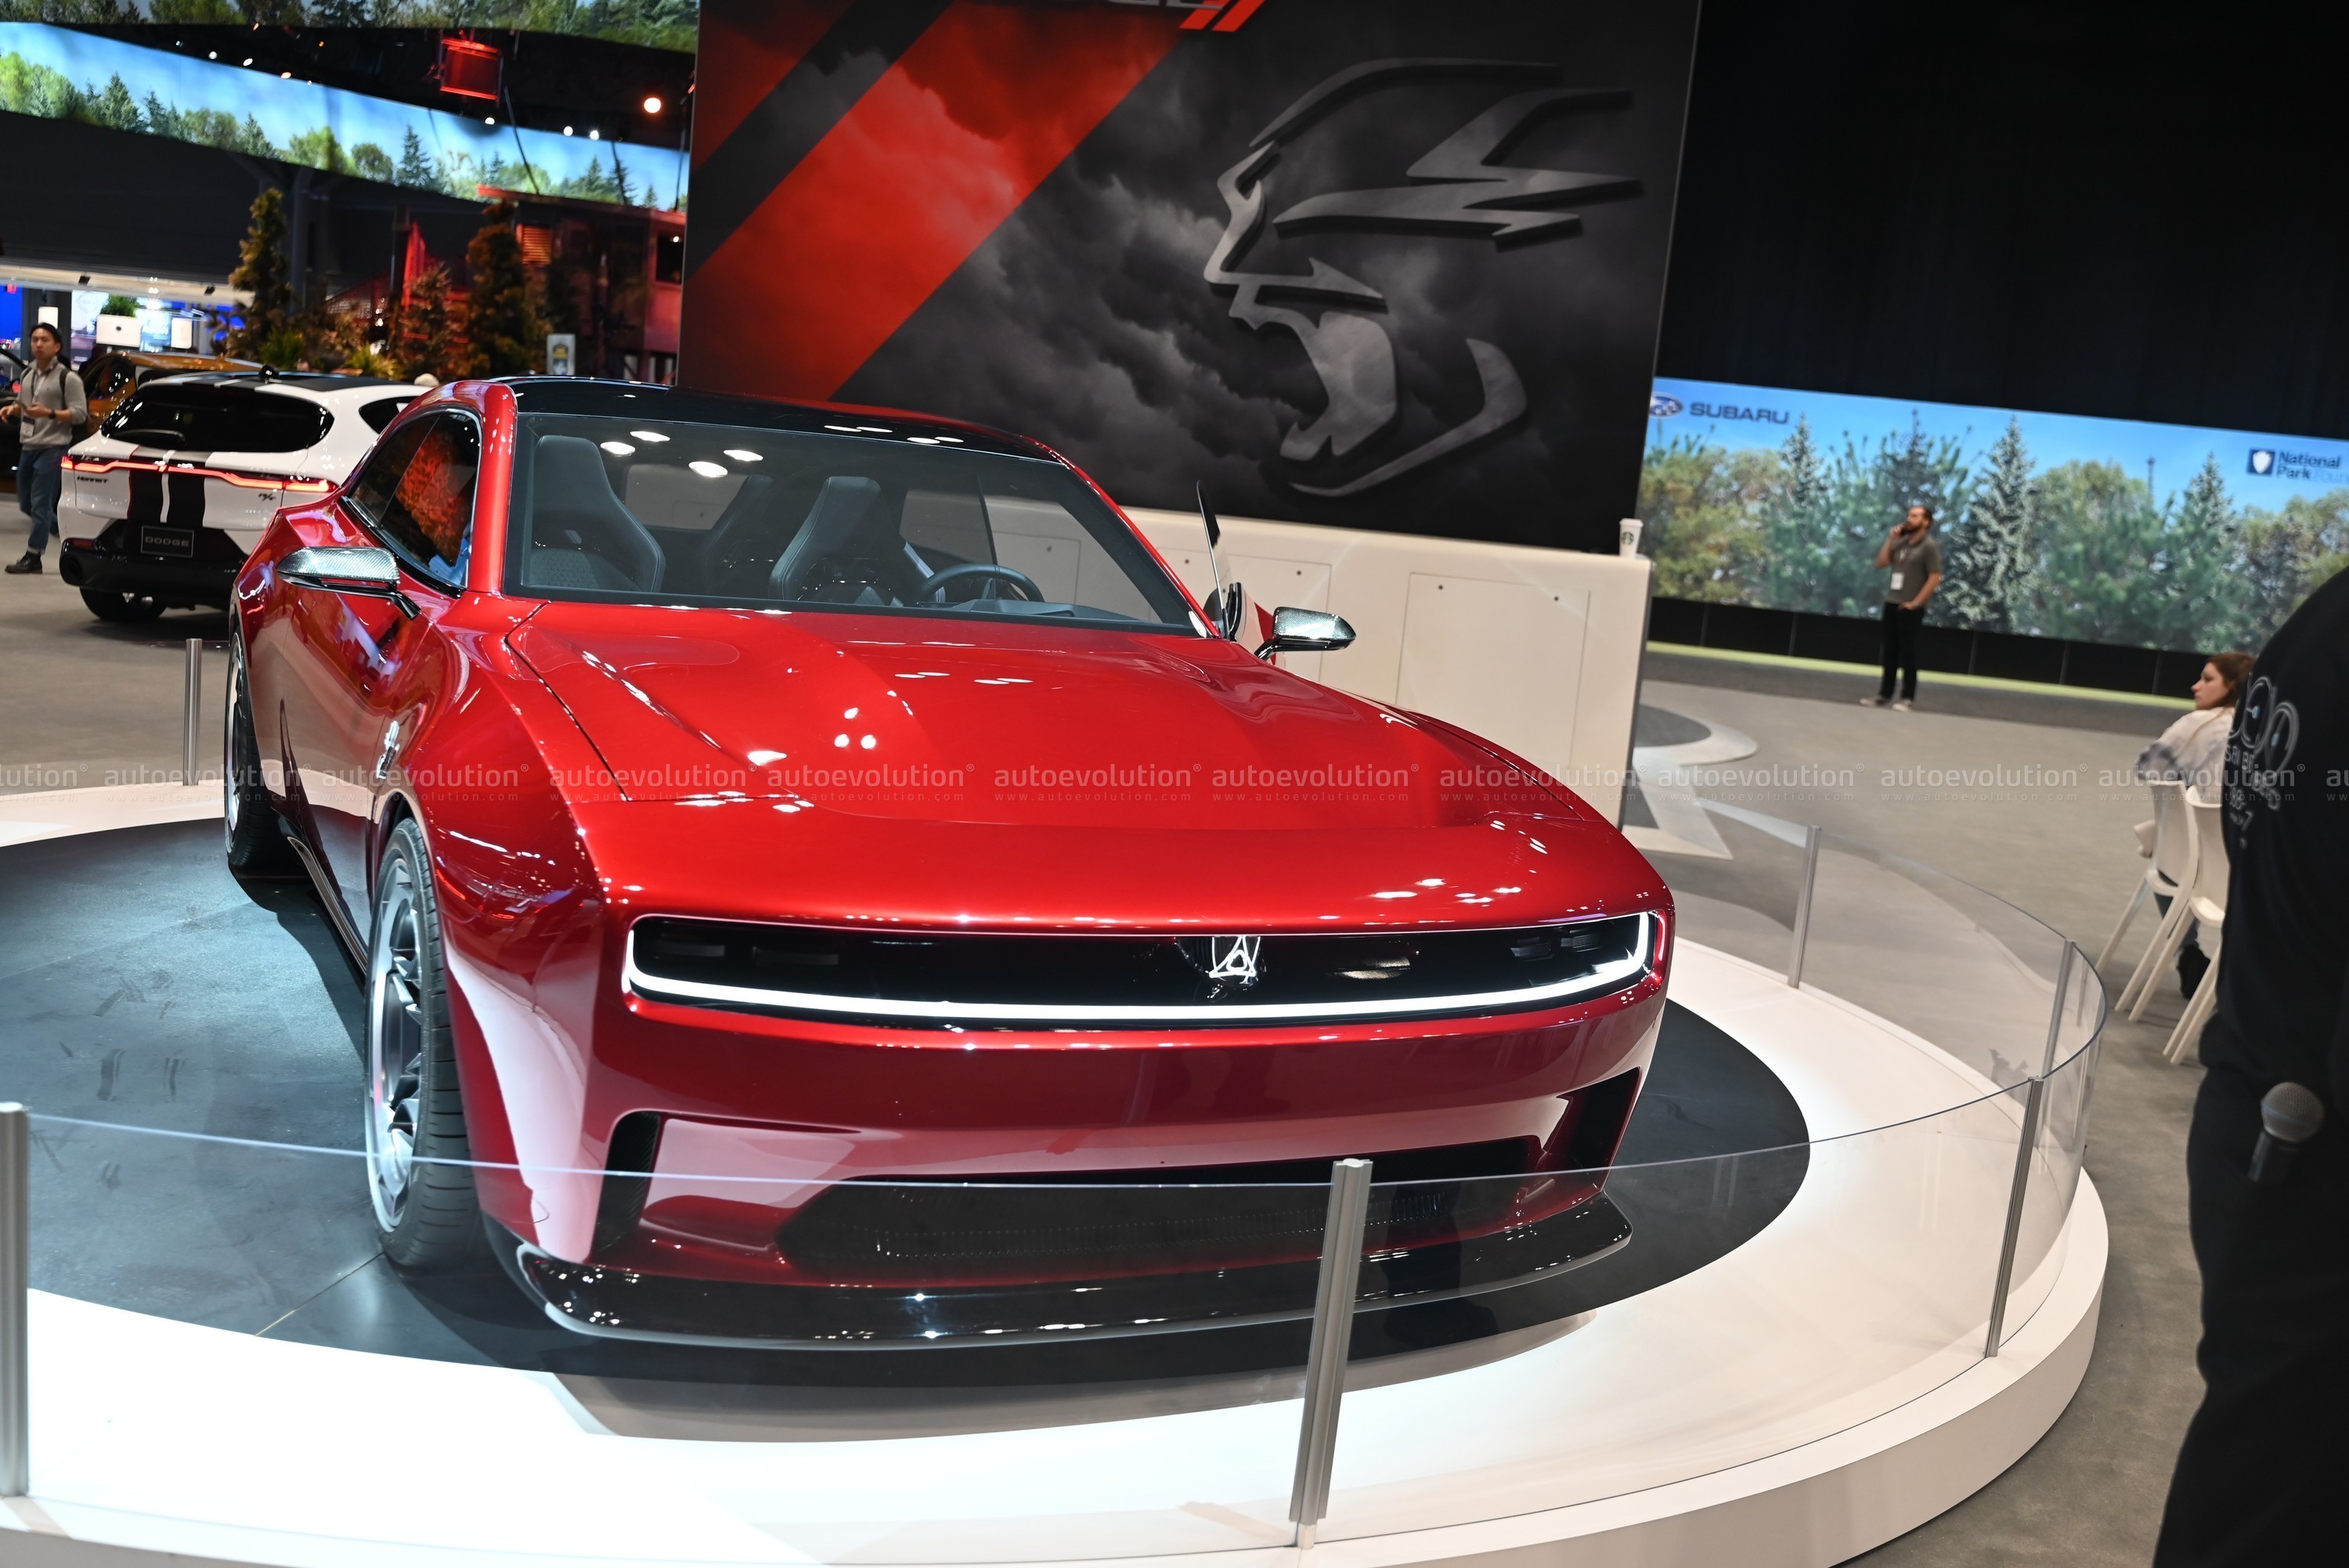 https://s1.cdn.autoevolution.com/images/news/gallery/dodge-charger-daytona-srt-the-important-muscle-car-in-50-years-shines-at-the-ny-auto-show_1.jpg